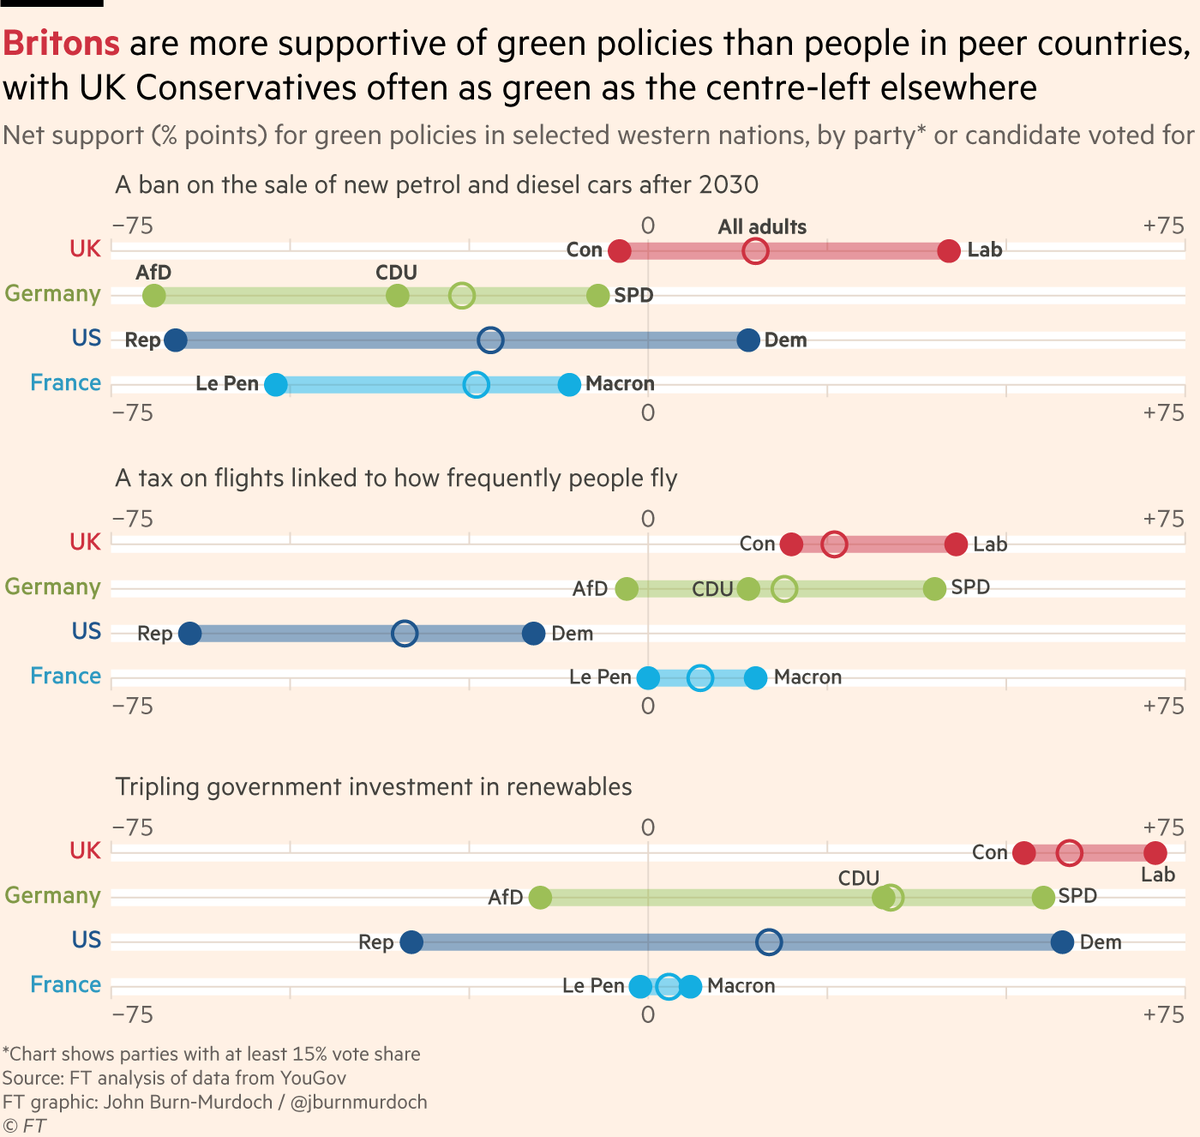 NEW: don’t let the ULEZ chatter mislead you. The British public is much more supportive and united on Net Zero policies than the public in peer countries, with Conservative voters frequently as green as the centre-left elsewhere on.ft.com/453oWeT